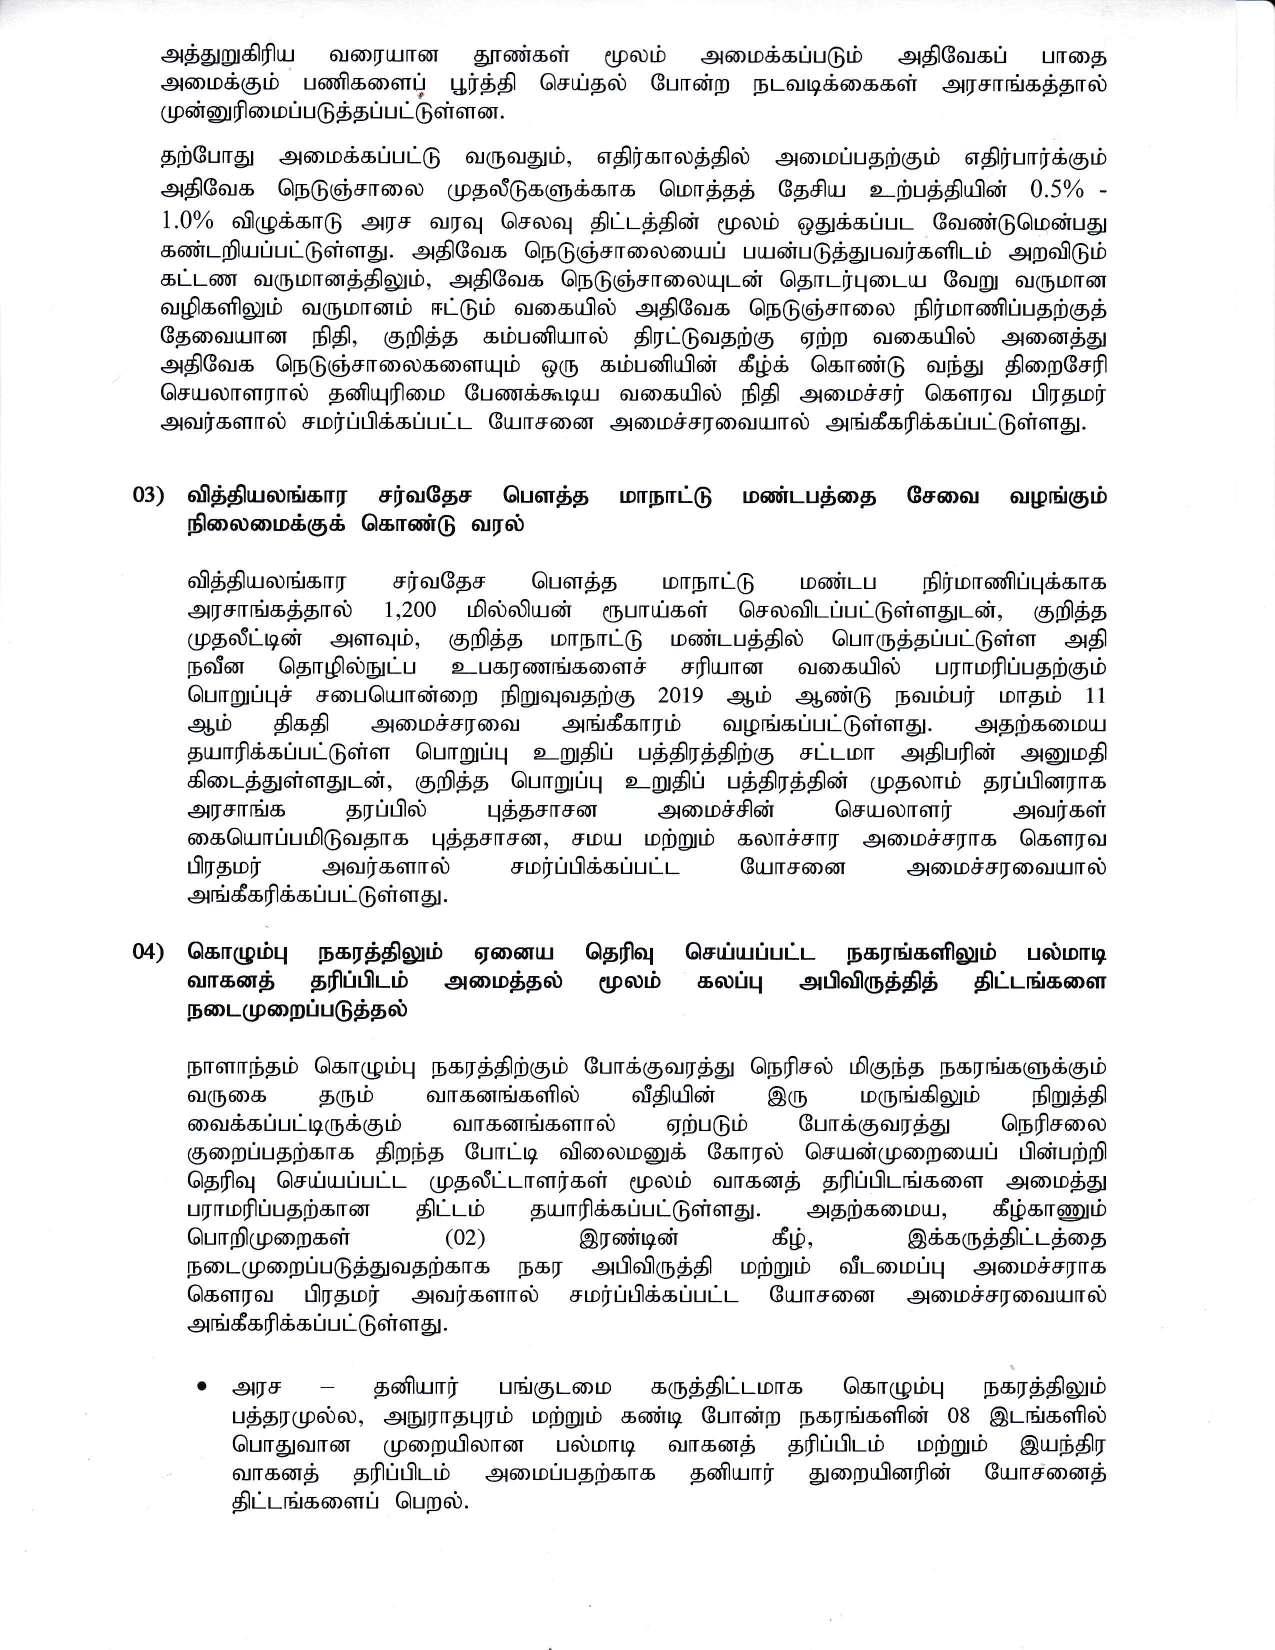 Cabinet Decision on 12.10.2020 Tamil compressed page 002